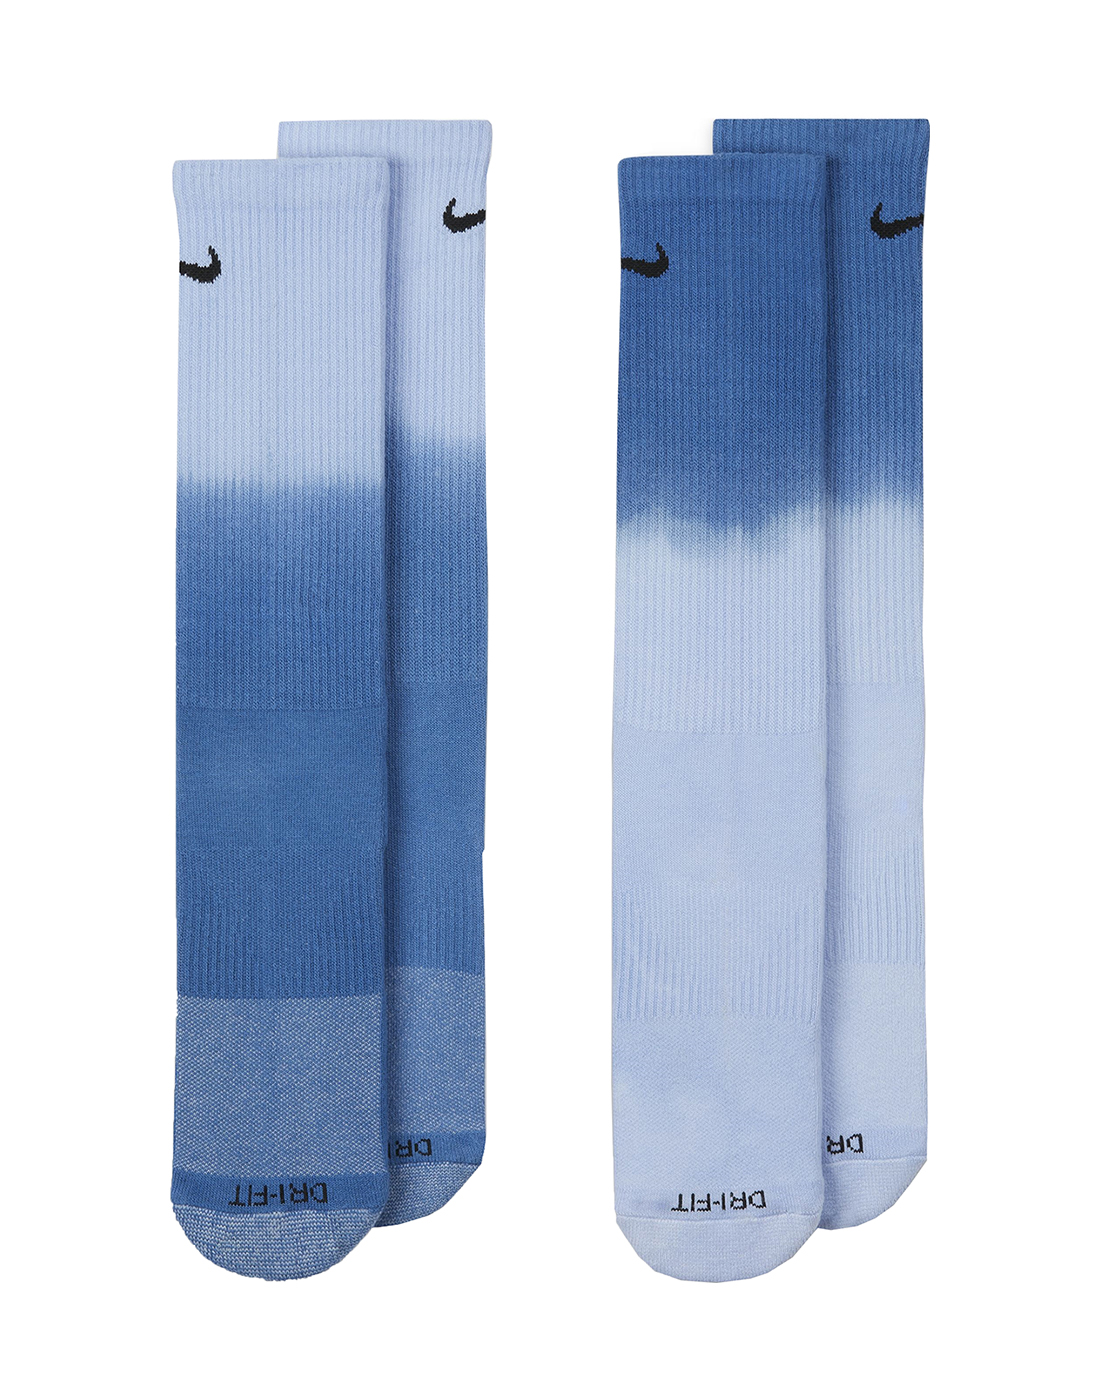 Nike Everyday Ombre 2 Pack Crew Socks - Blue | Life Style Sports UK